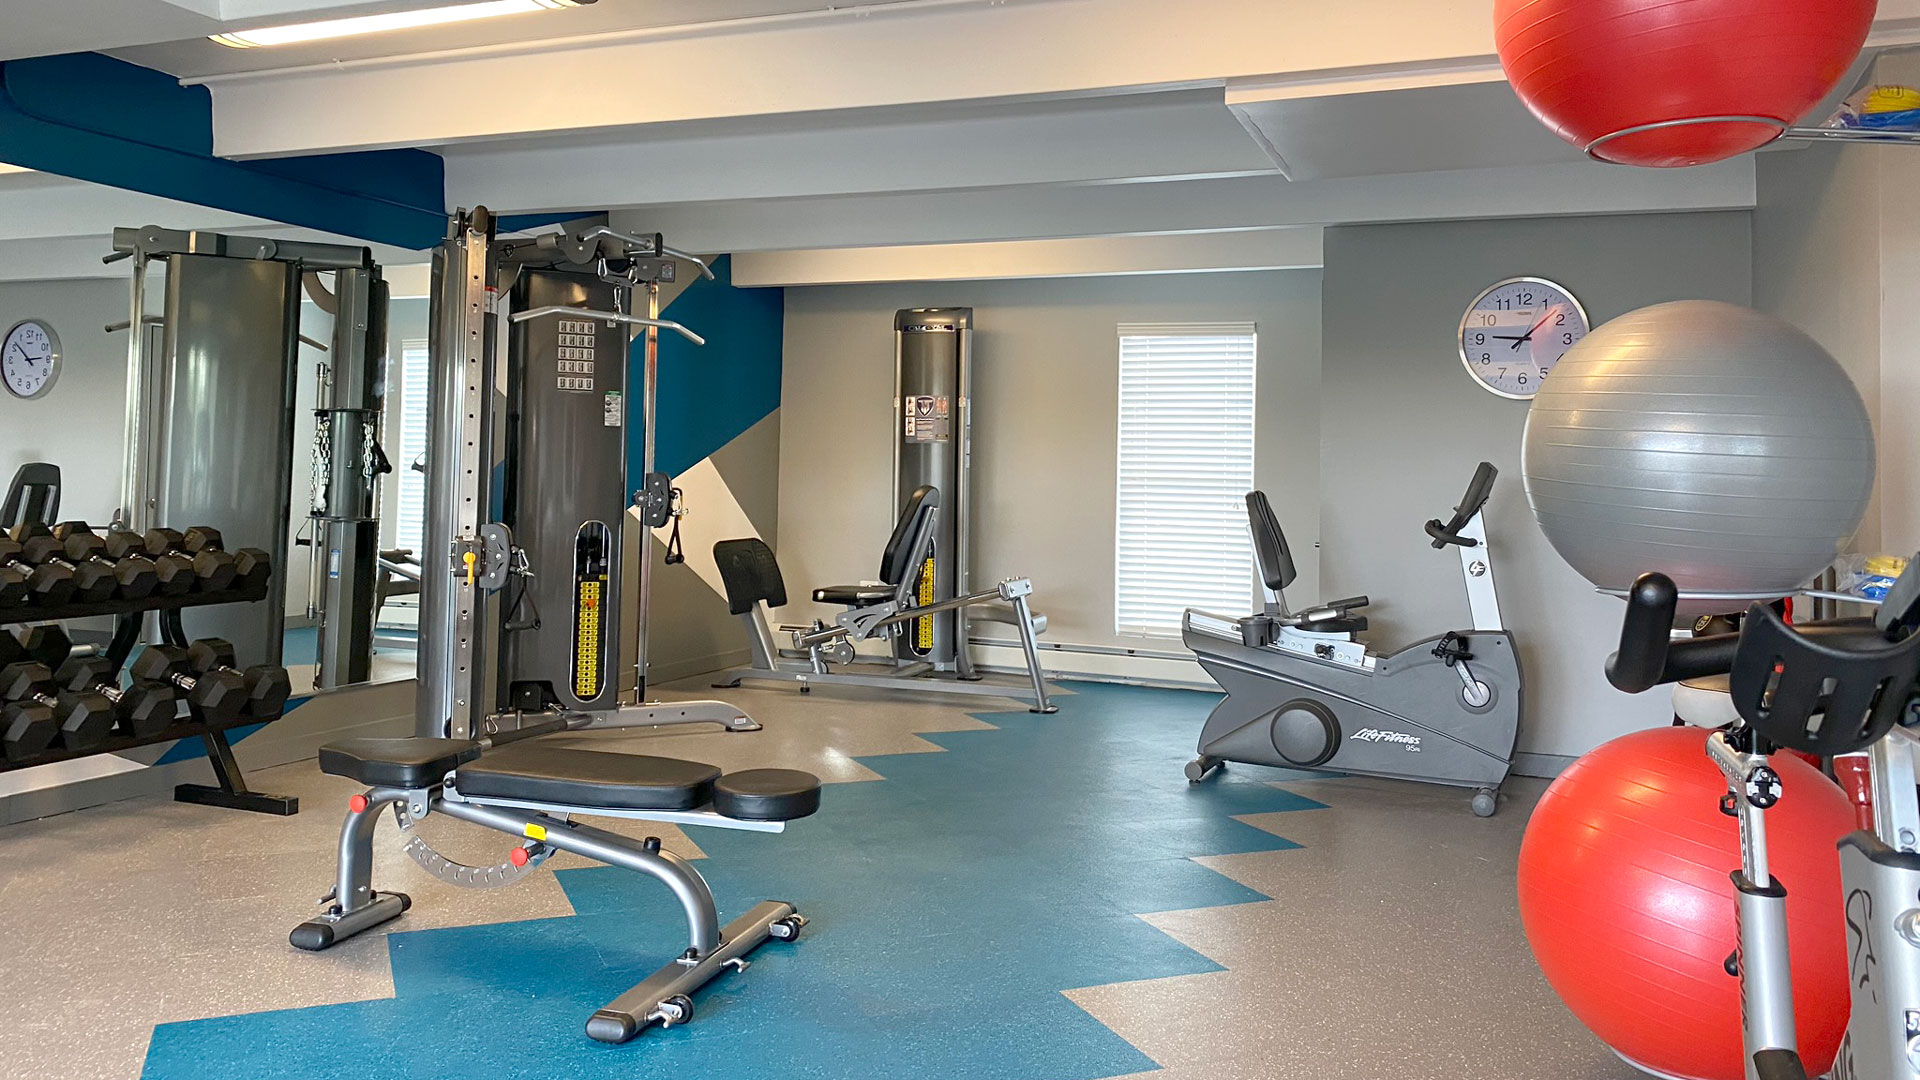 Fitness center with cardio and weight machines.